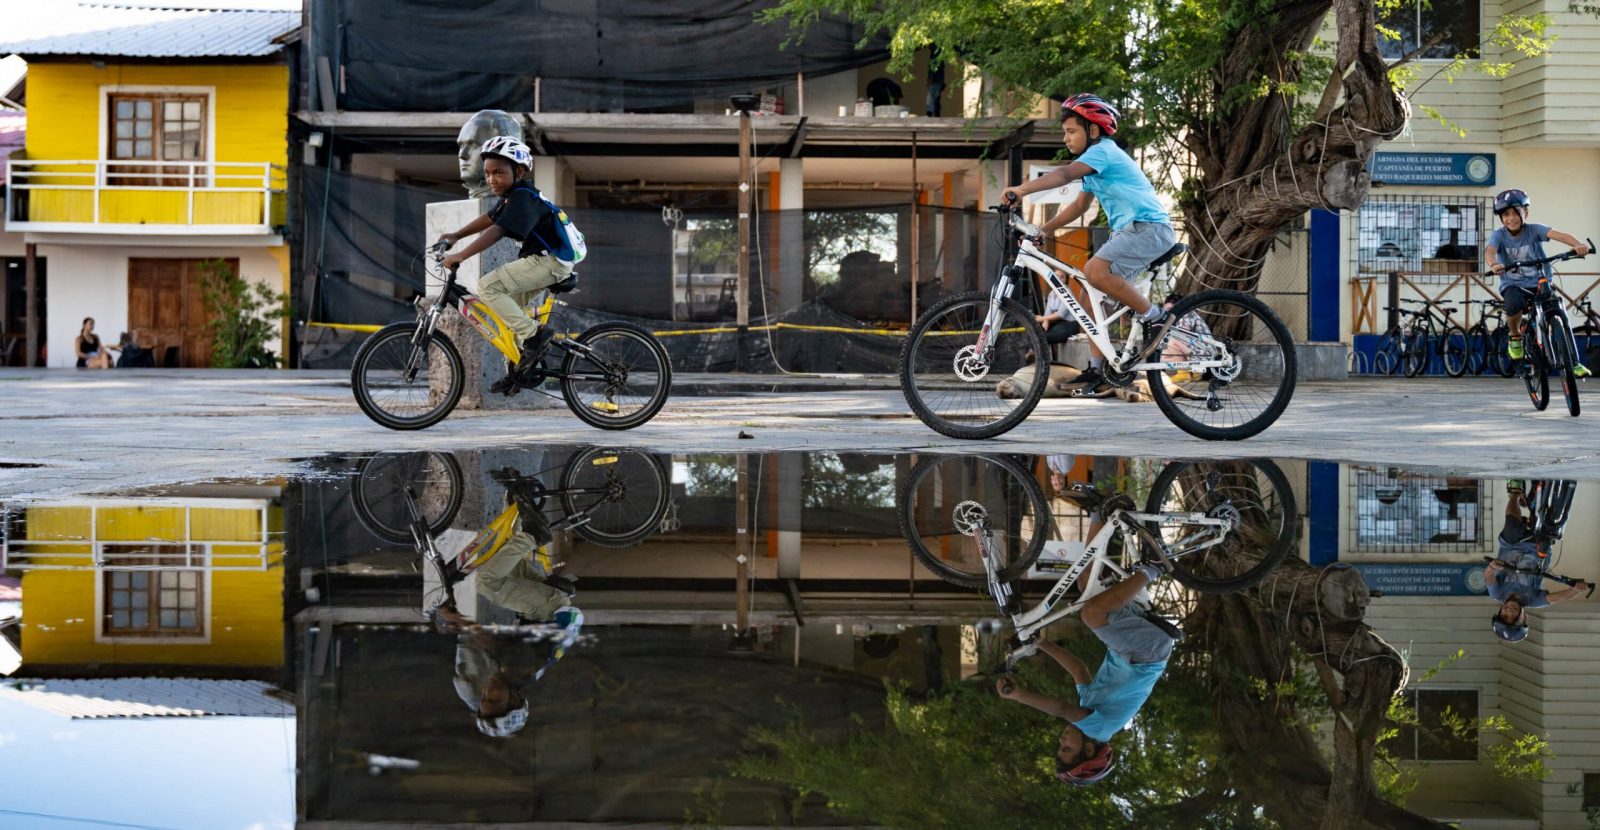 Three children ride on their bikes in the plaza right behind a large puddle that reflects their images.